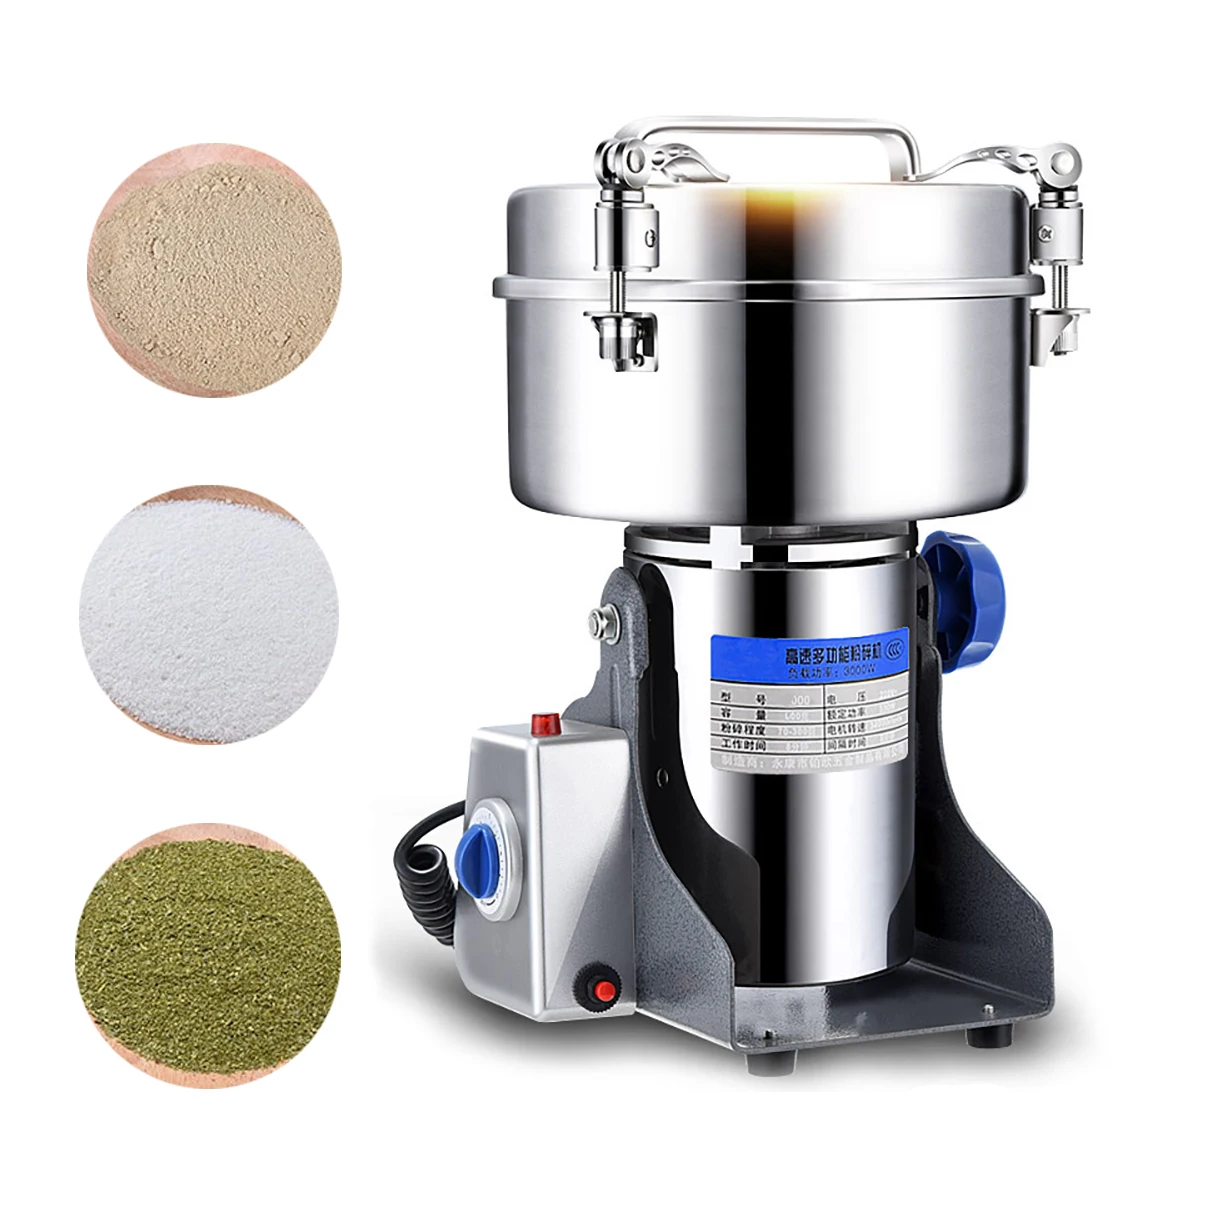 

1000g/2000g Grains Spices Hebals Cereals Coffee Dry Food Grinder Mill Grinding Machine gristmill home flour powder crusher